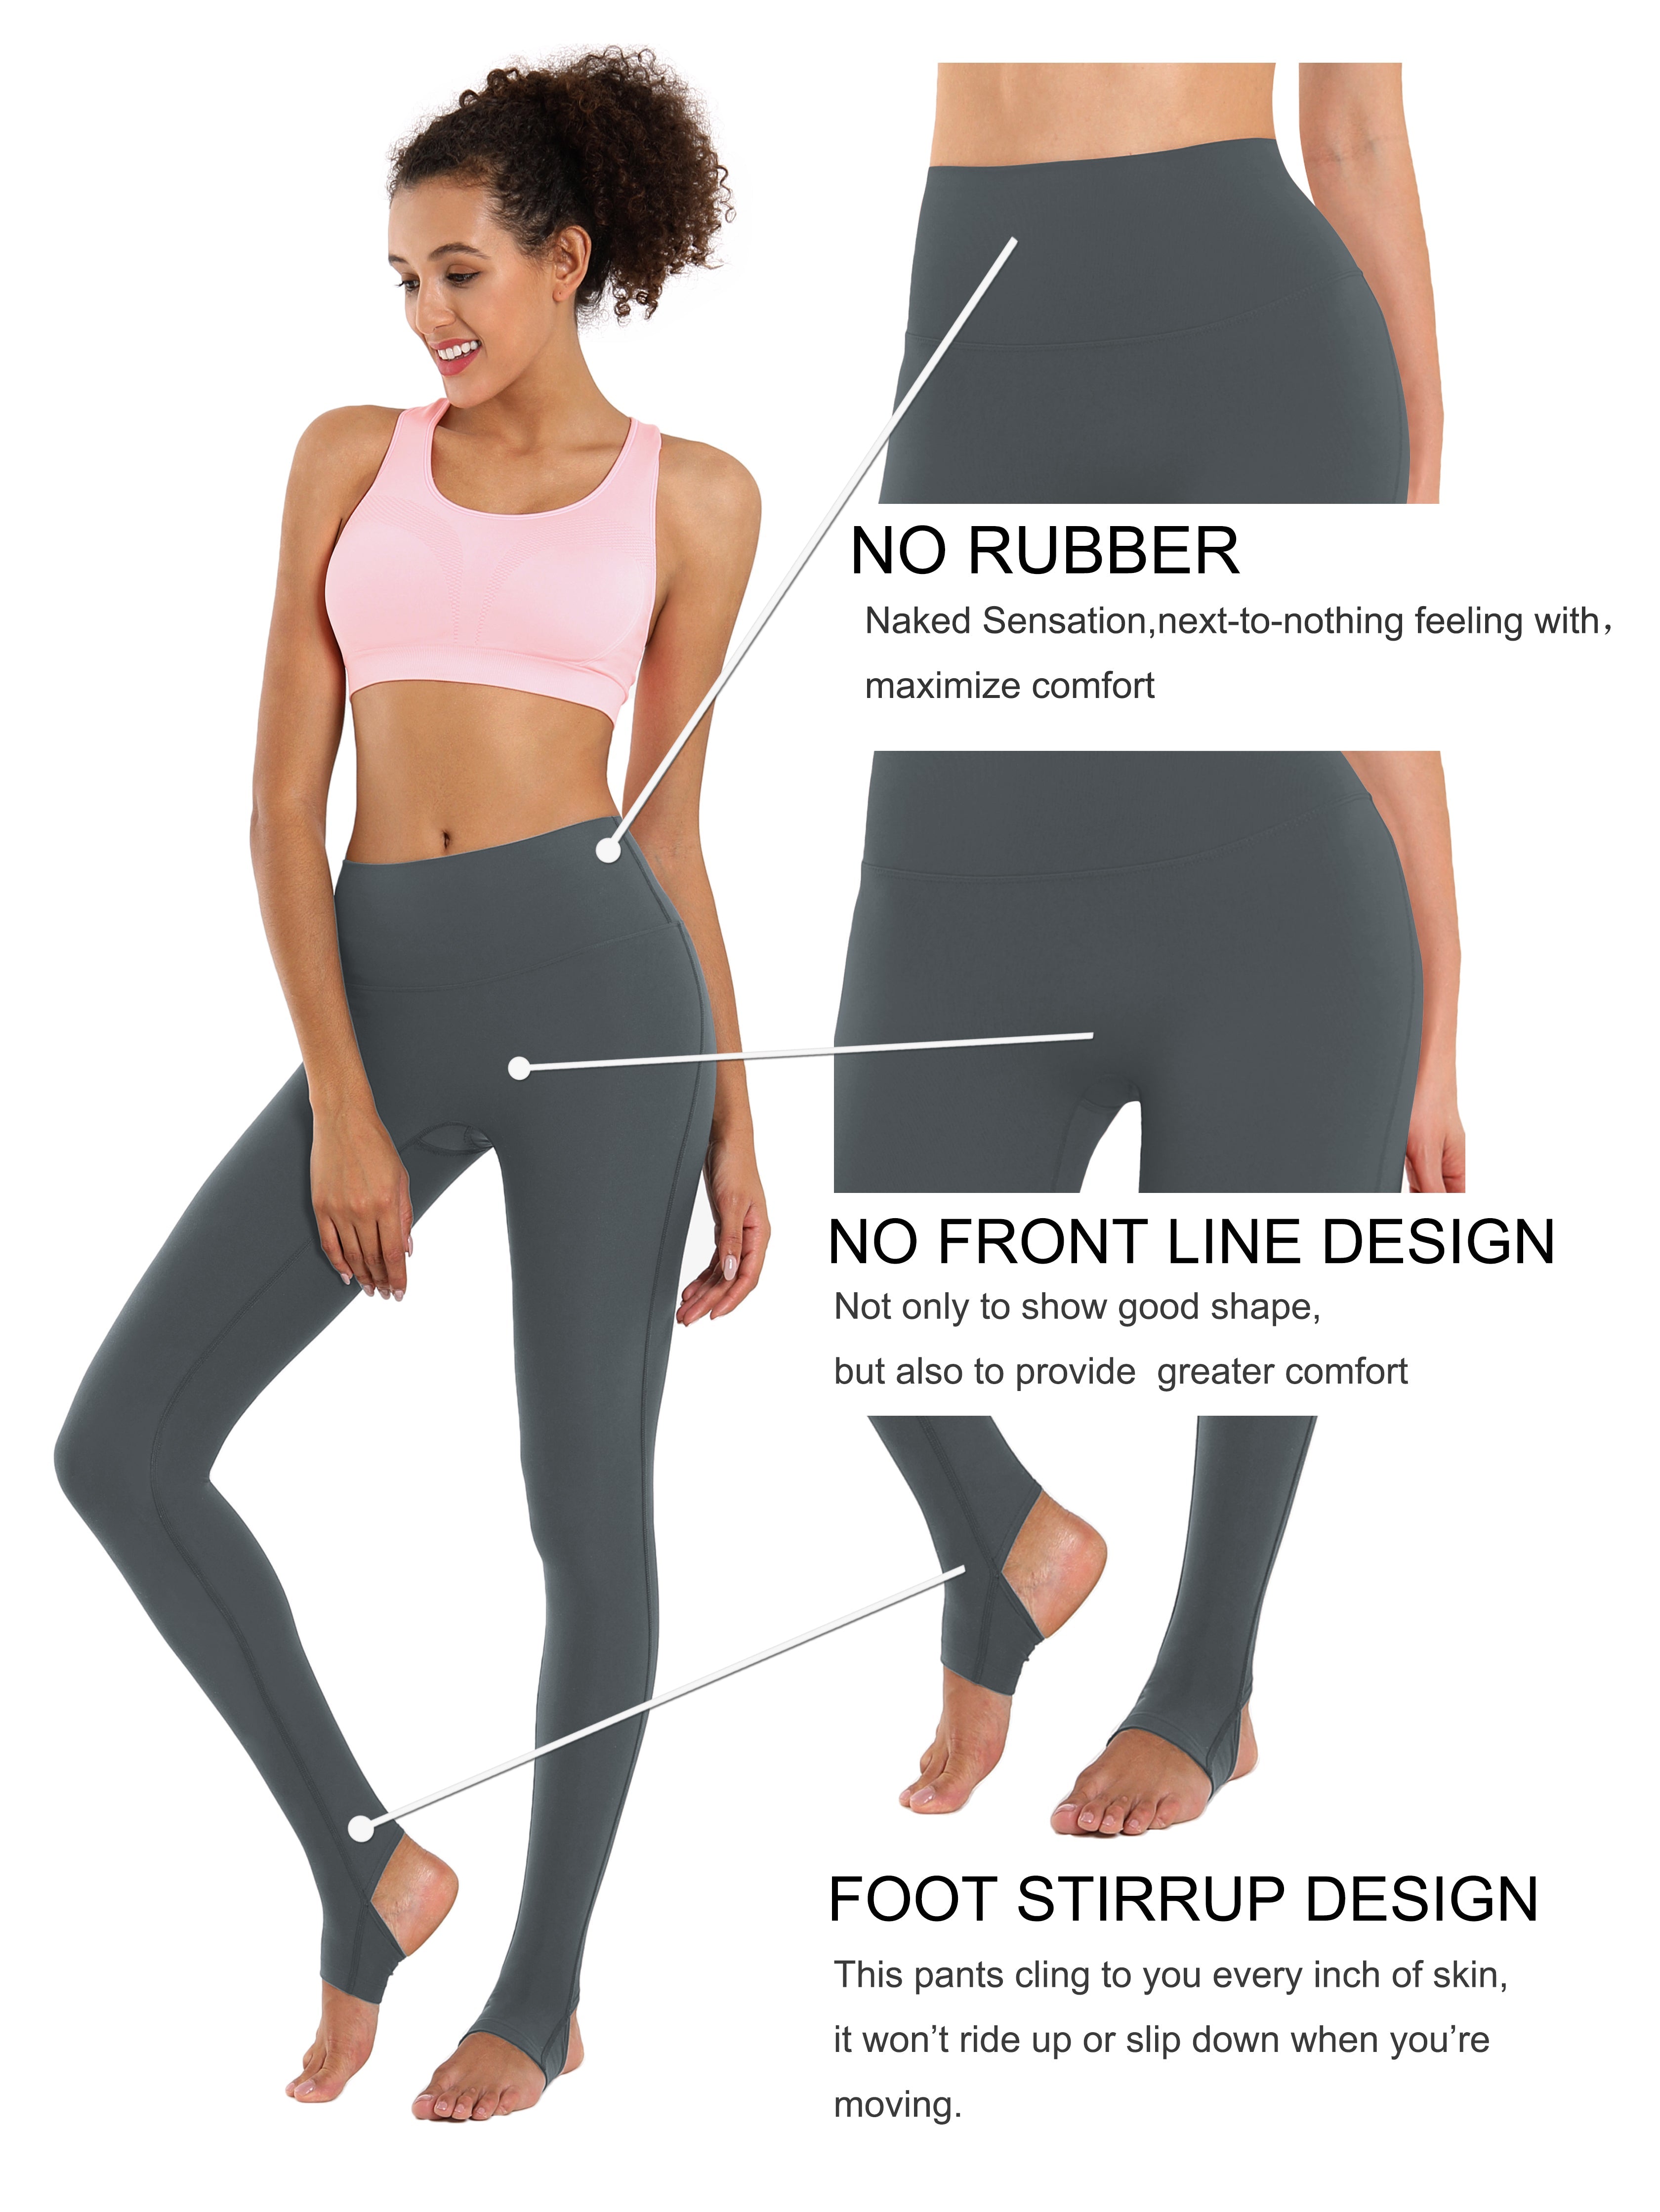 Over the Heel Yoga Pants shadowcharcoal Over the Heel Design 87%Nylon/13%Spandex Fabric doesn't attract lint easily 4-way stretch No see-through Moisture-wicking Tummy control